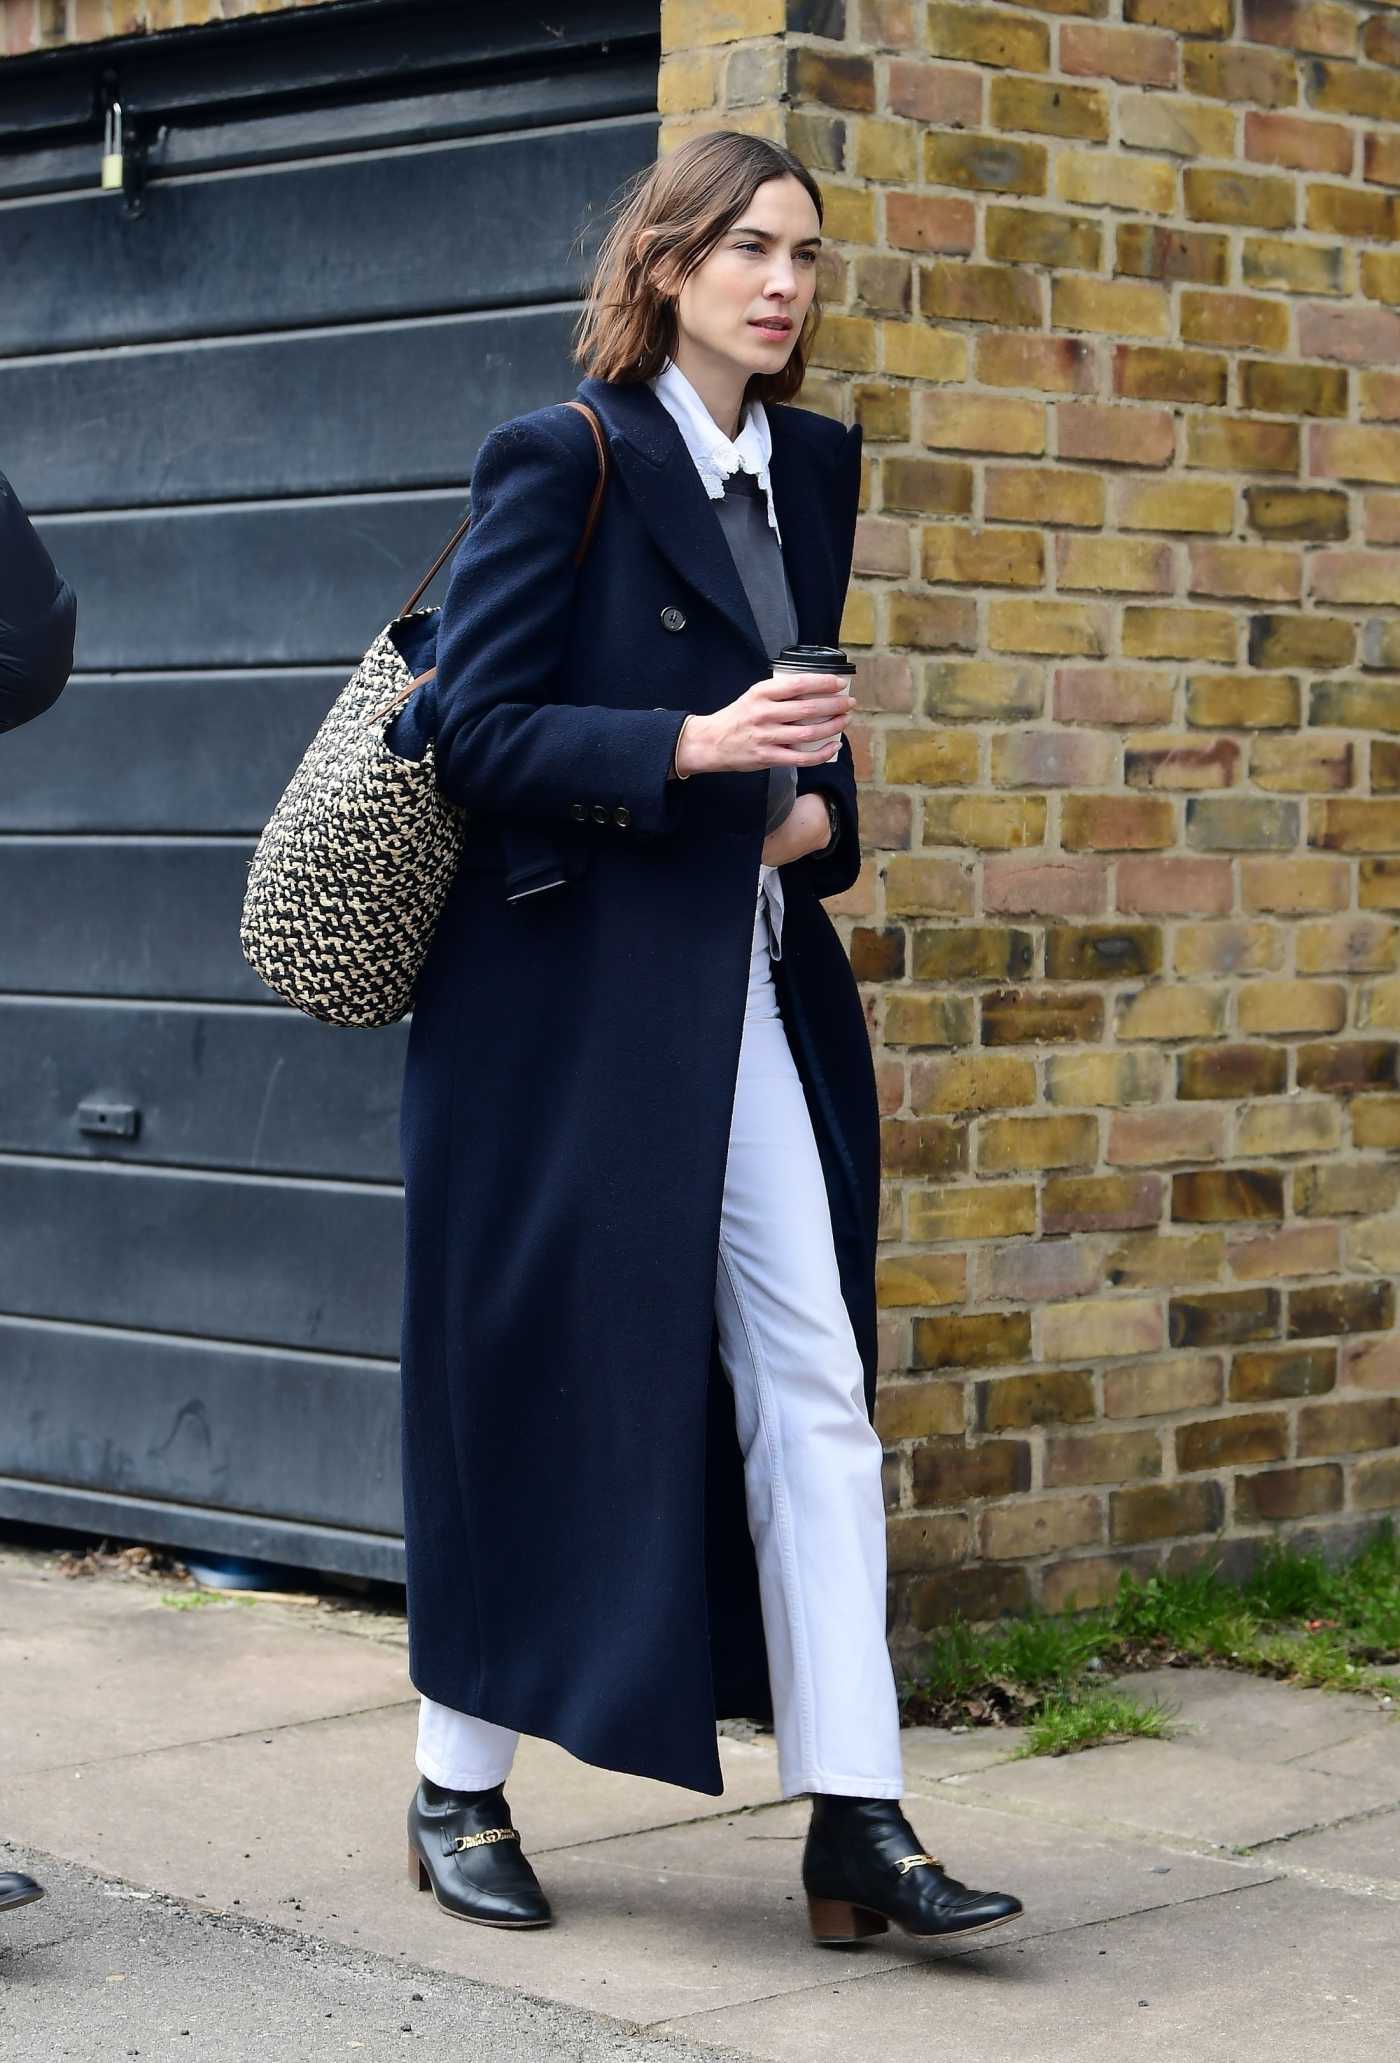 Alexa Chung in a Black Coat Was Seen Out in London 04/08/2021